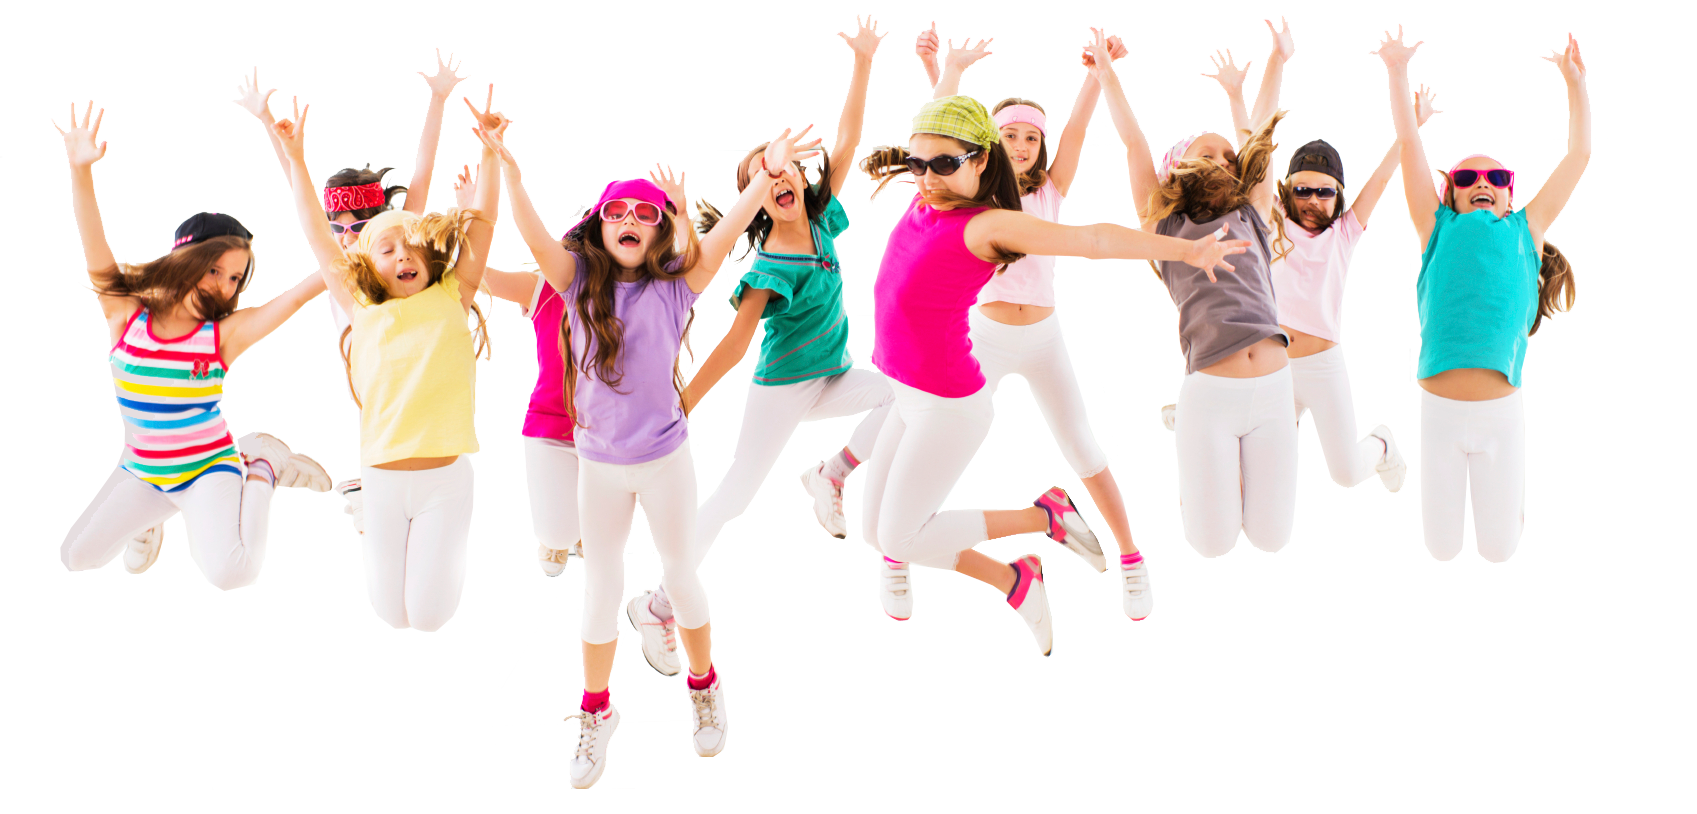 Dancing people clipart - Clip